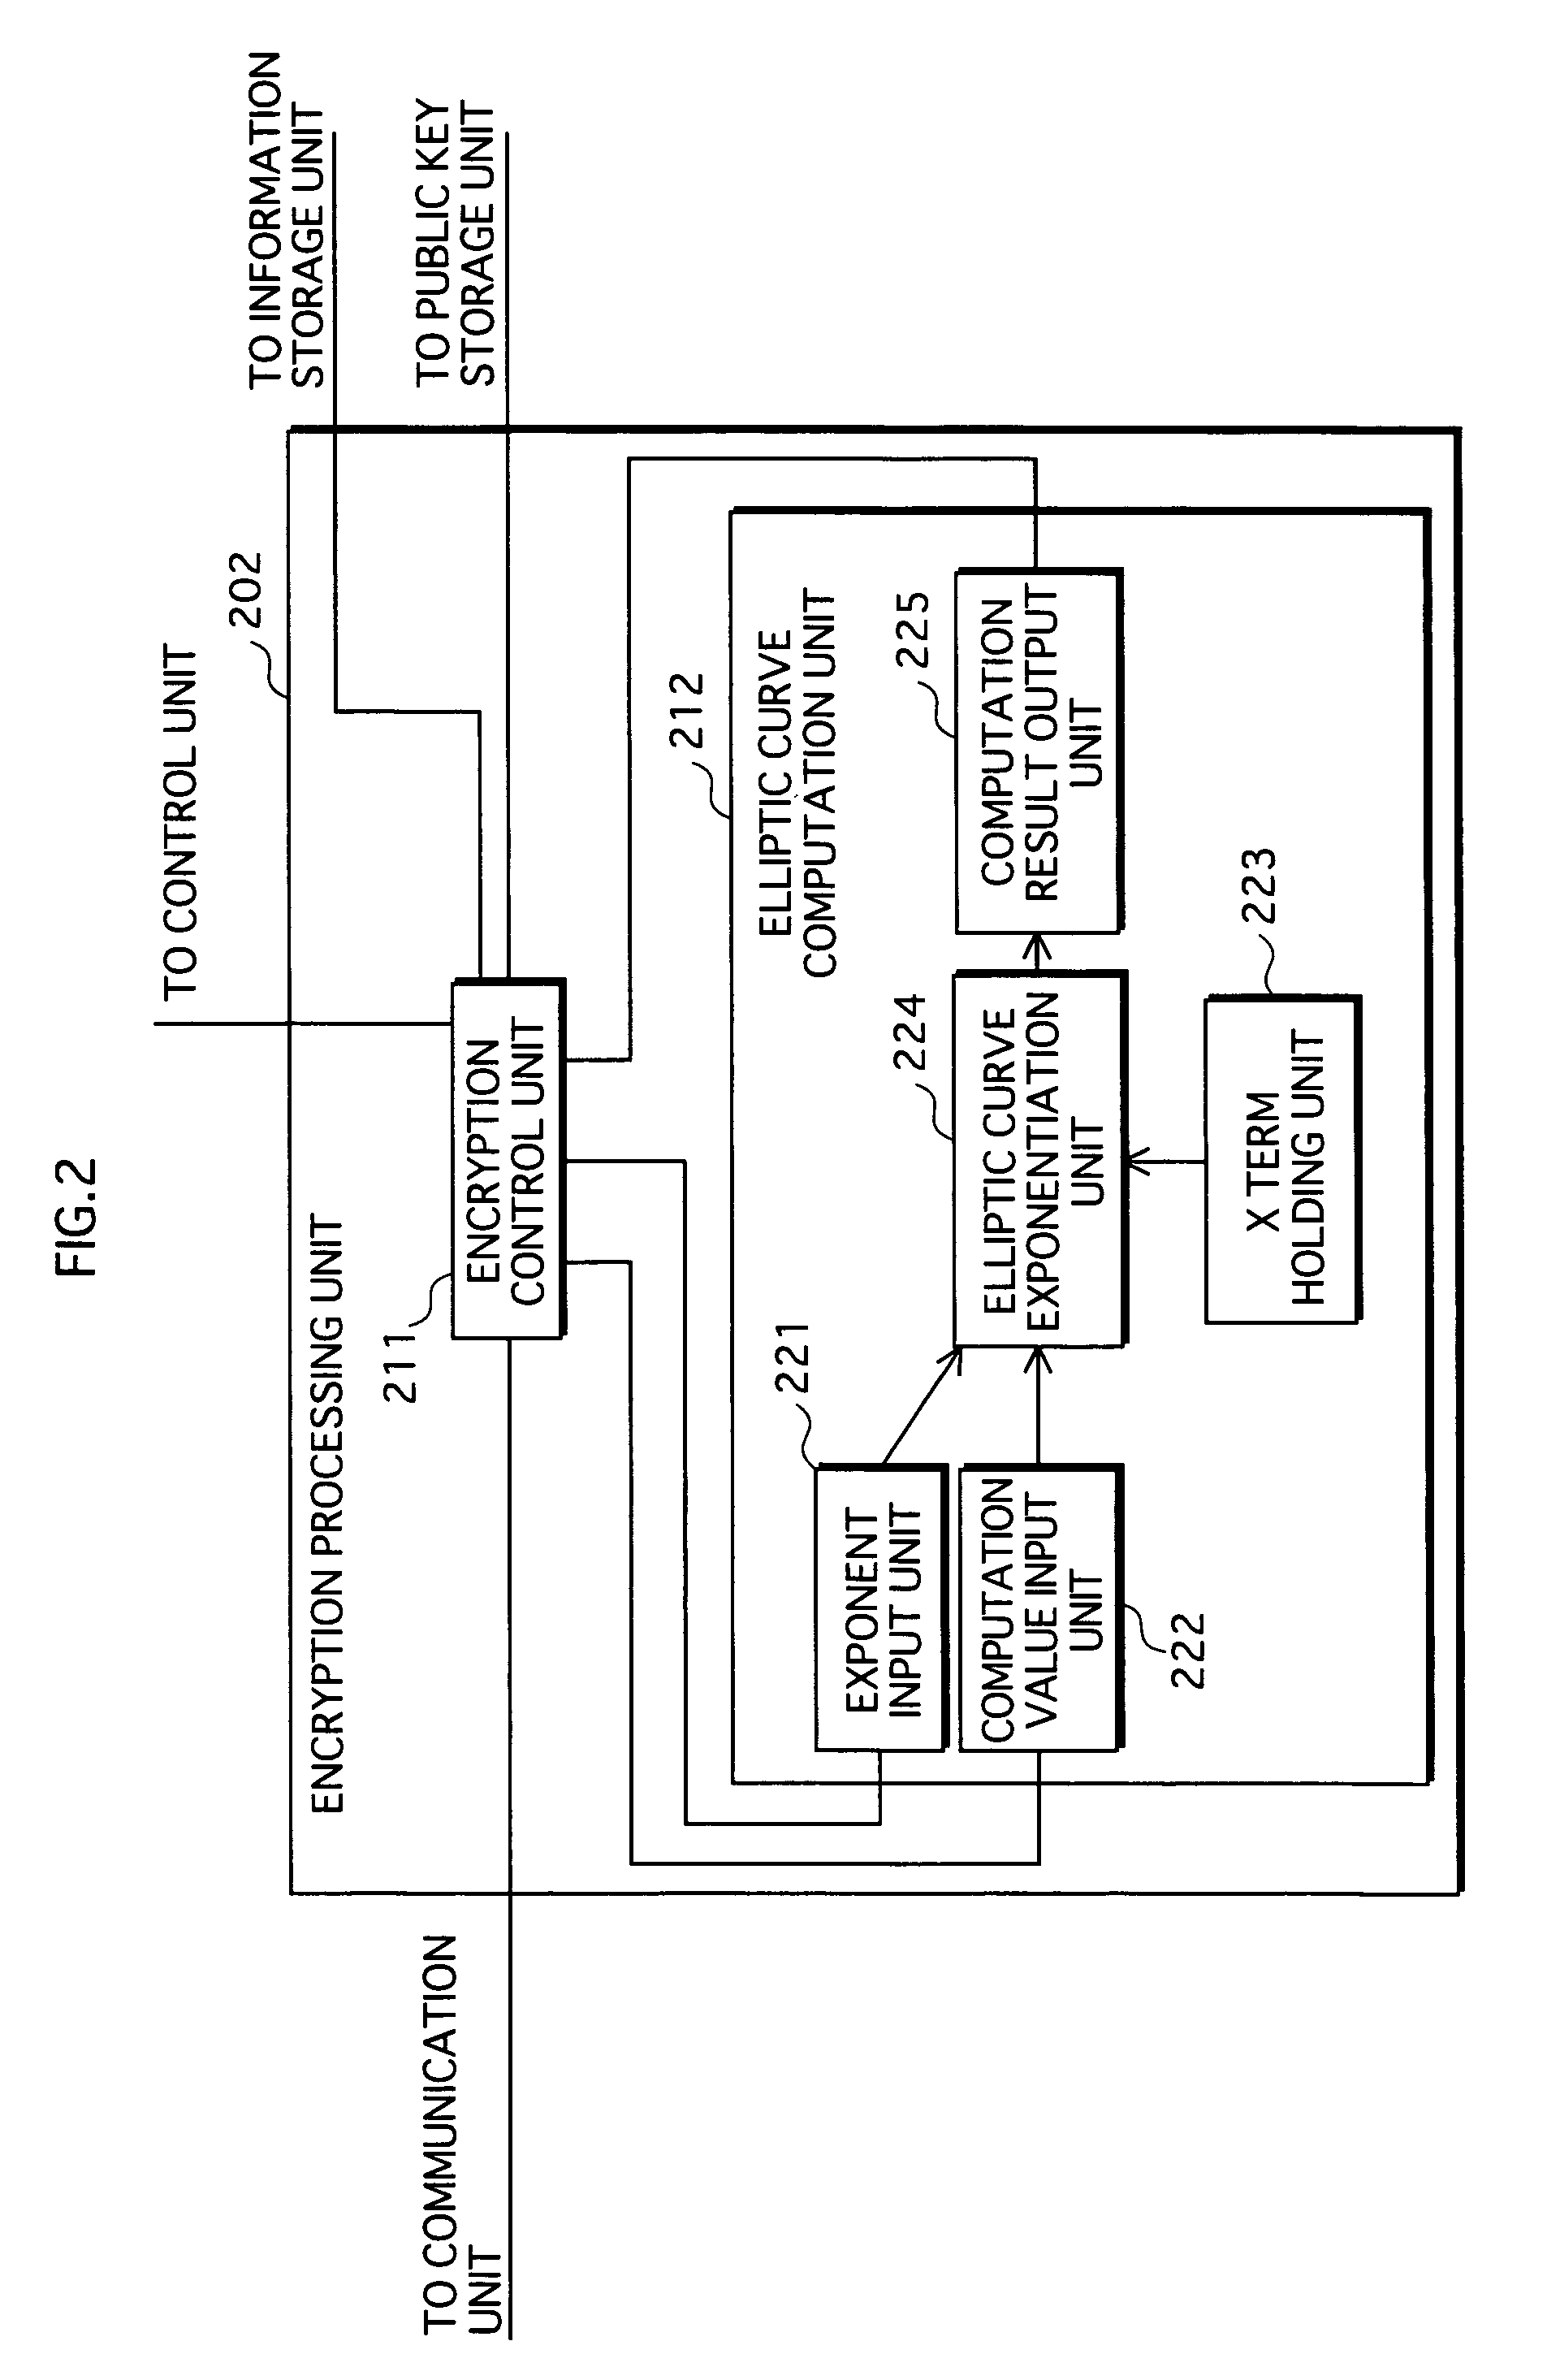 Elliptic curve exponentiation apparatus that can counter differential fault attack, and information security apparatus